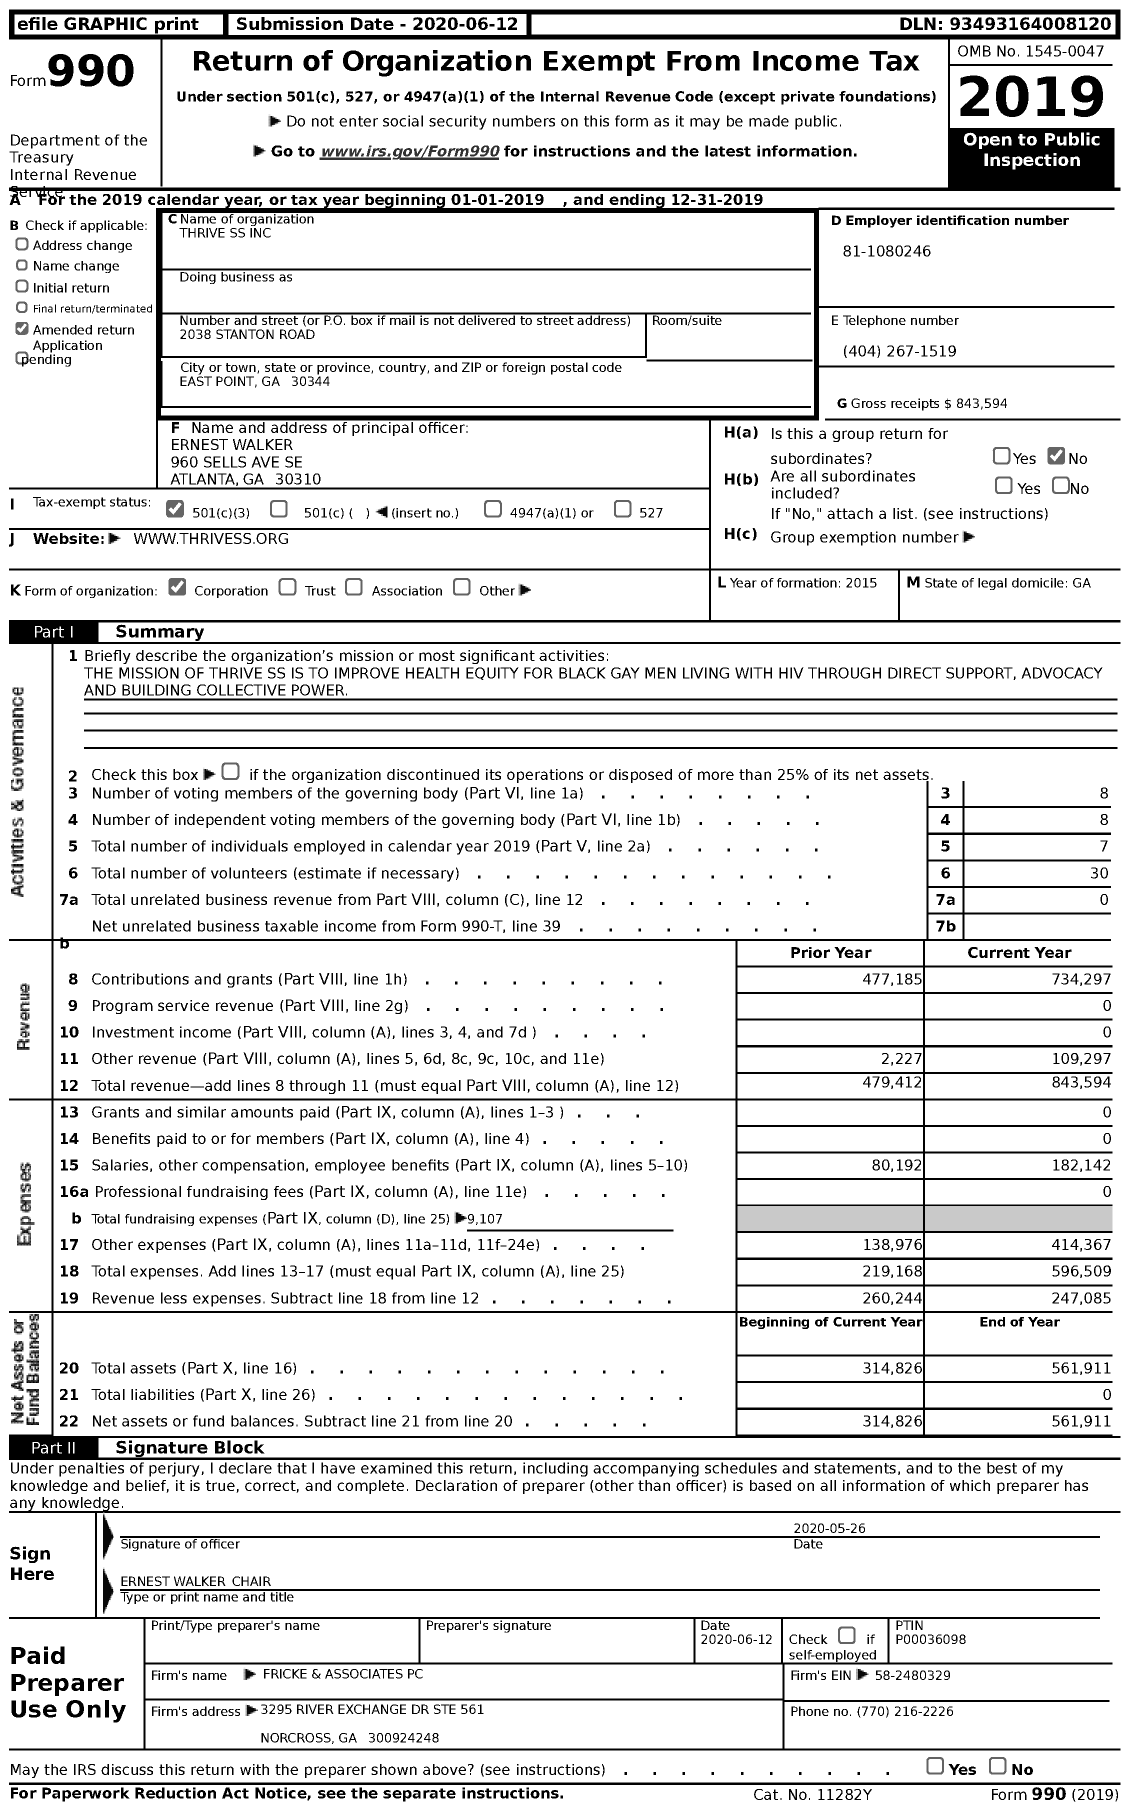 Image of first page of 2019 Form 990 for Thrive SS